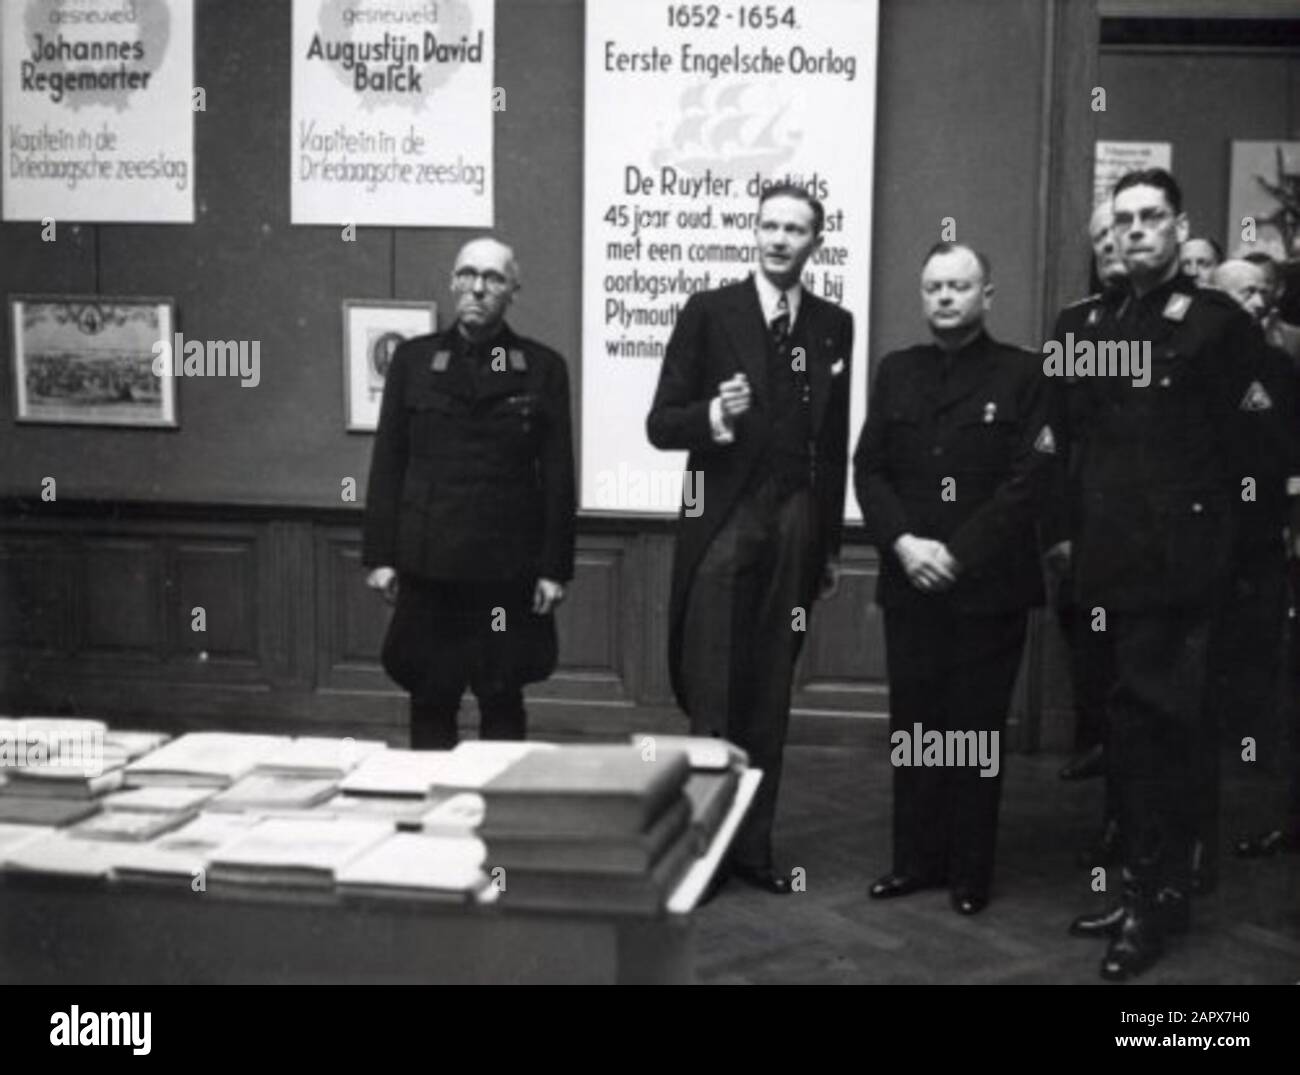 During the Second World War. Anton Mussert, leader of the National Socialist Movement in the Netherlands, during a tour of the De Ruyter Exhibition at the Rijksmuseum in Amsterdam. On the right, Prof. Dr. T. Goedewaagen, on the left the organizer of the exhibition Mr. Wild. Netherlands, 19 June 1942.; Stock Photo